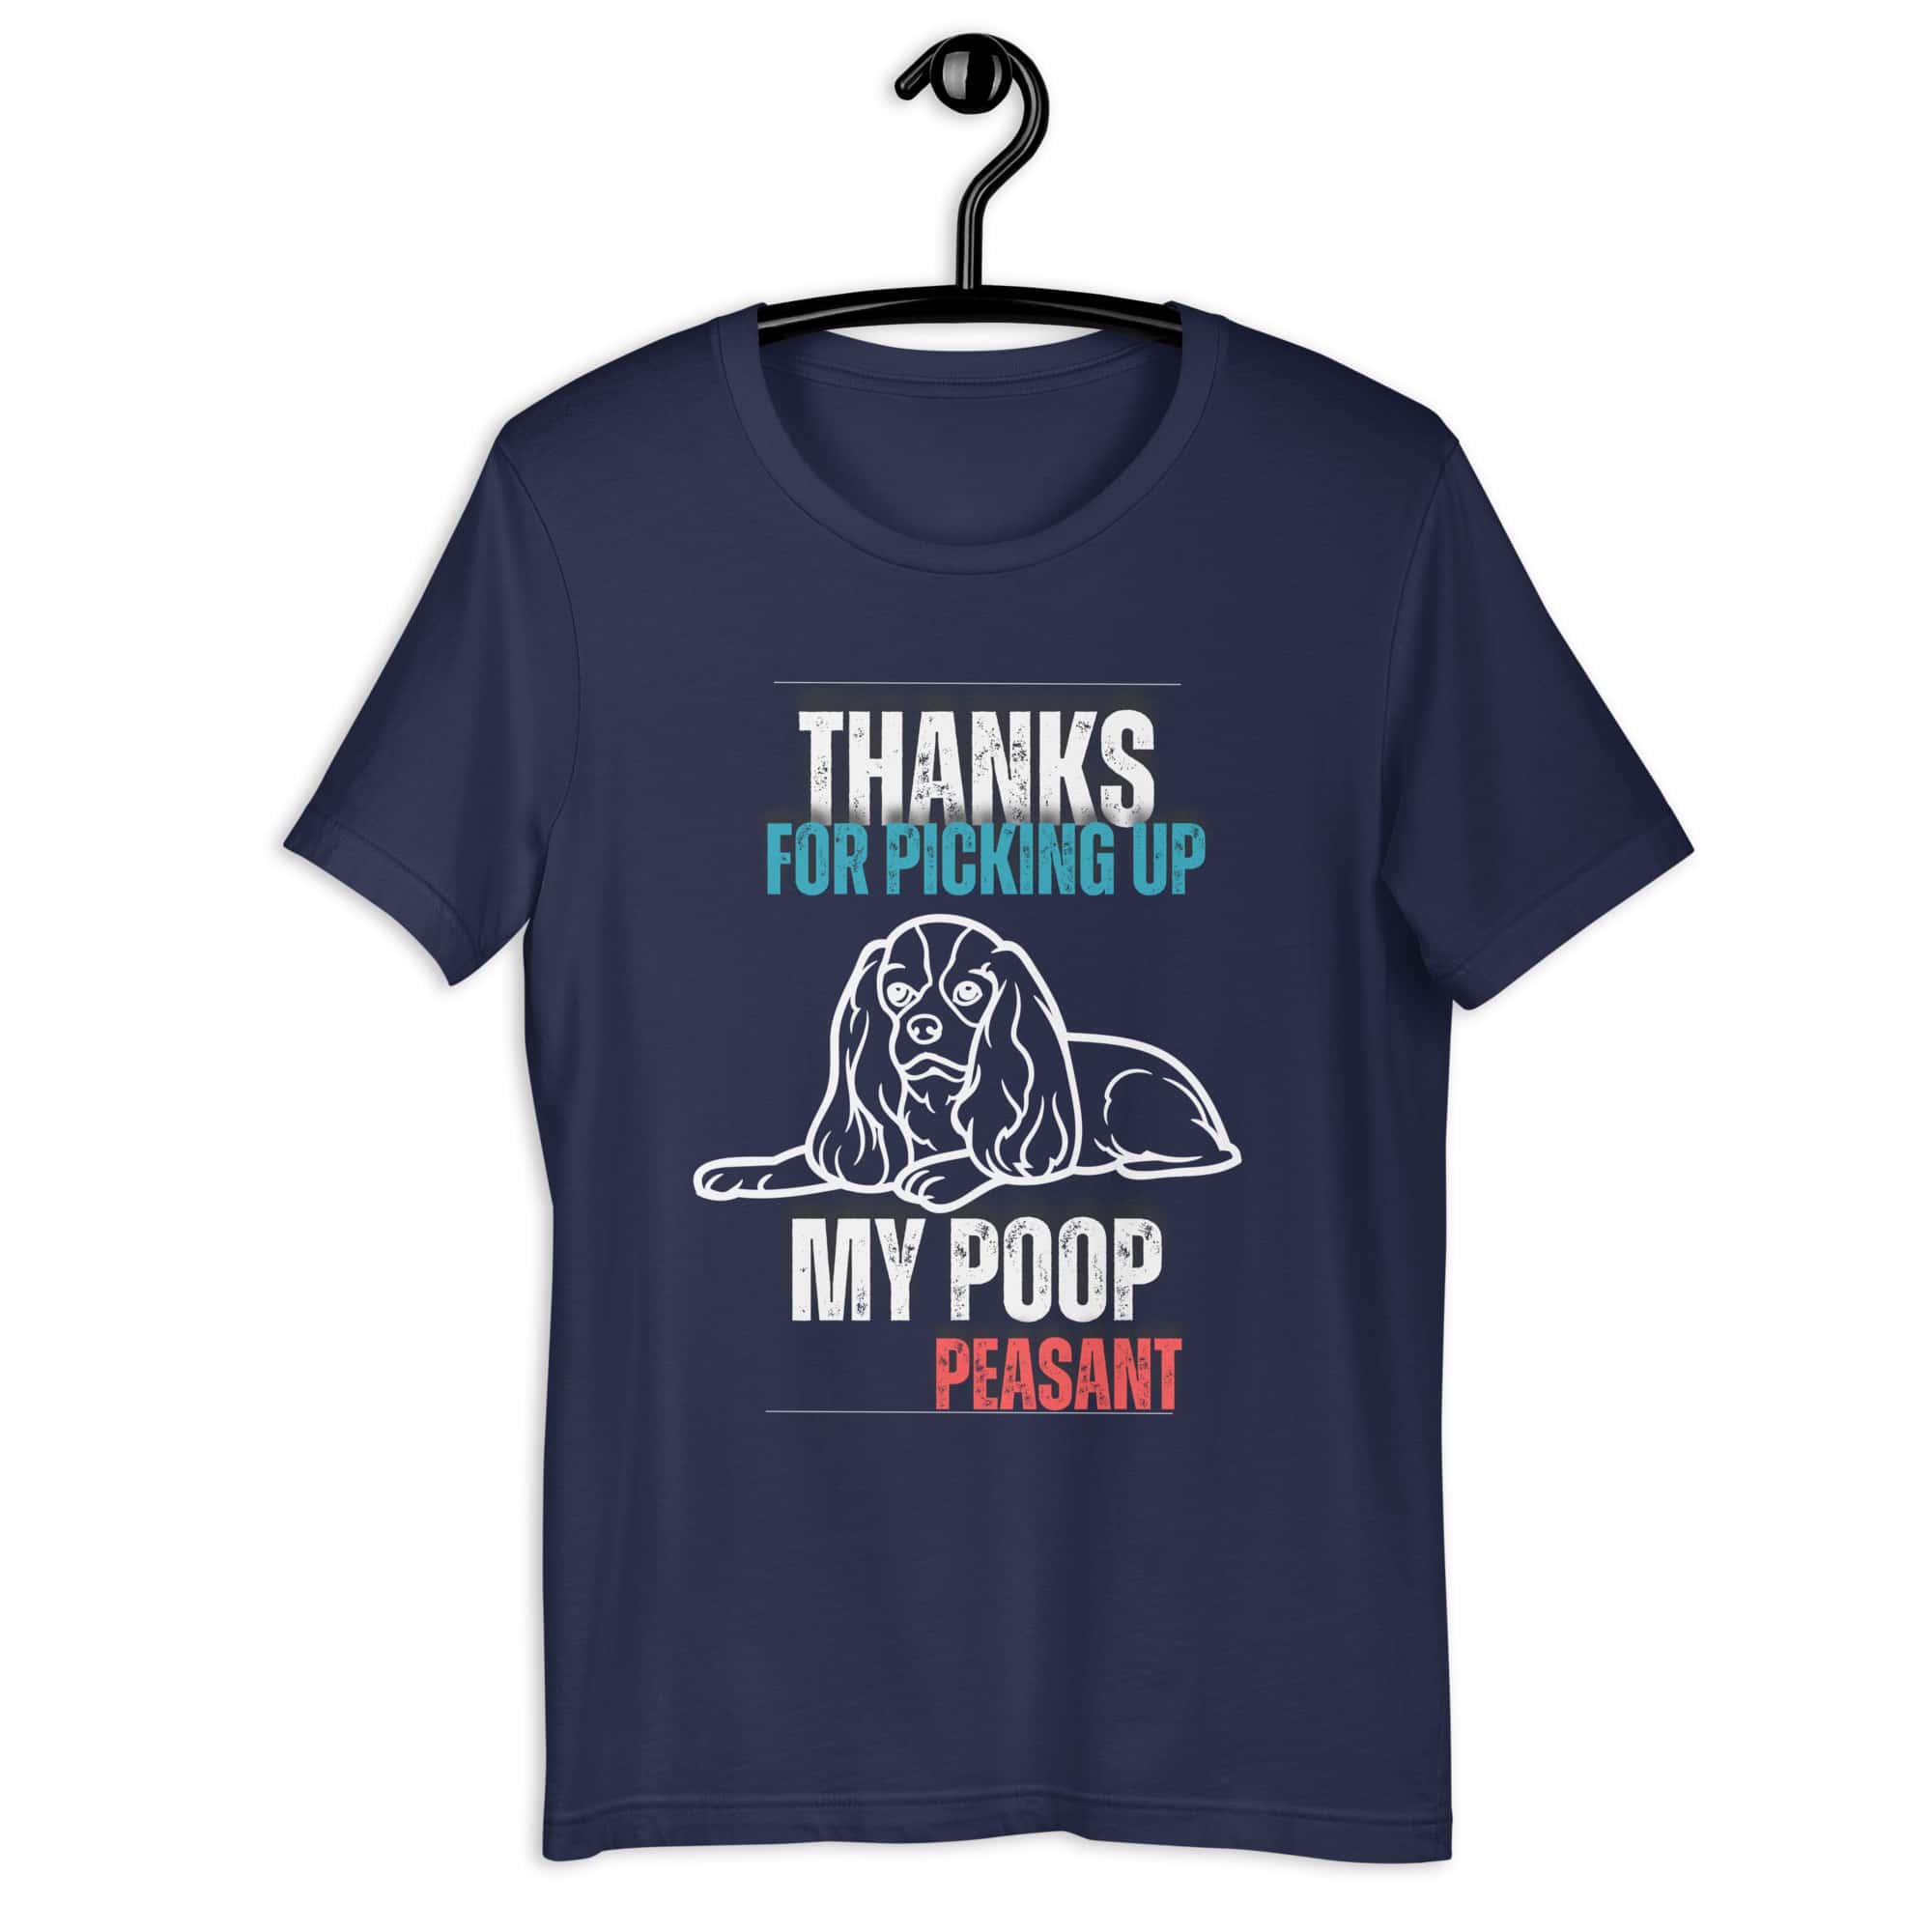 Thanks For Picking Up My POOP Funny Hounds Unisex T-Shirt. Navy